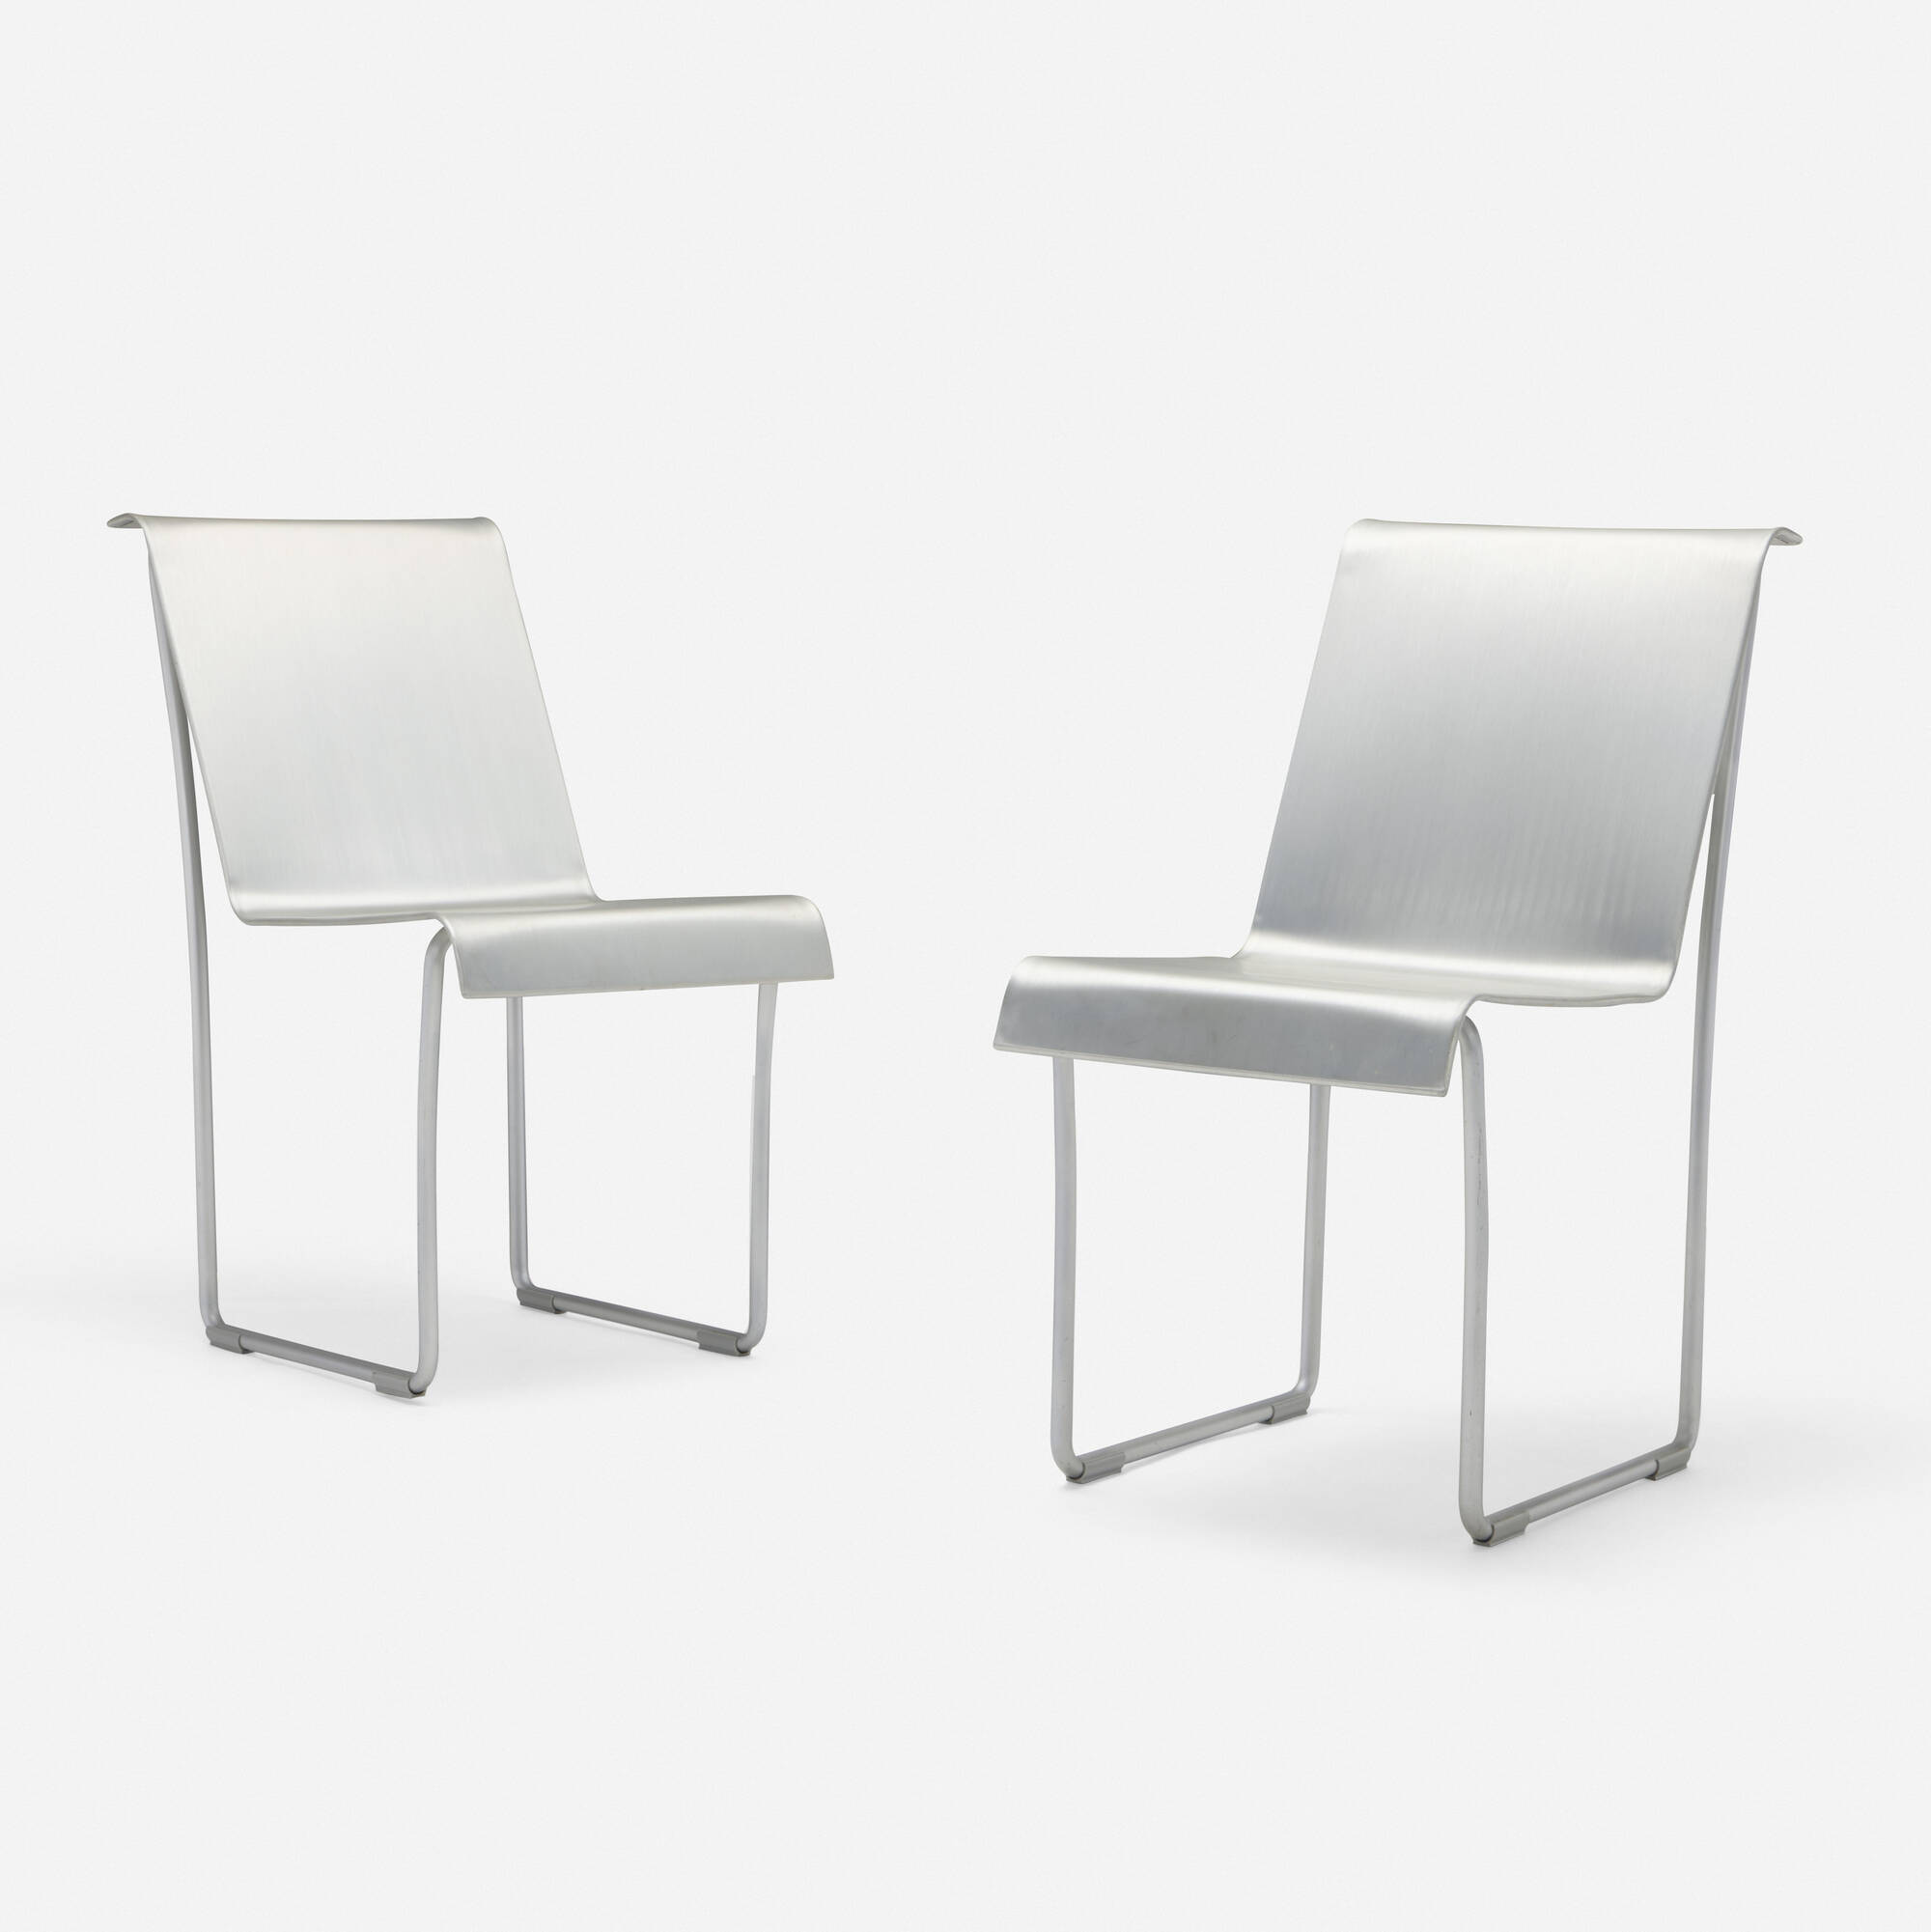 171: FRANK GEHRY, Superlight chairs, pair < Contemporary Design 